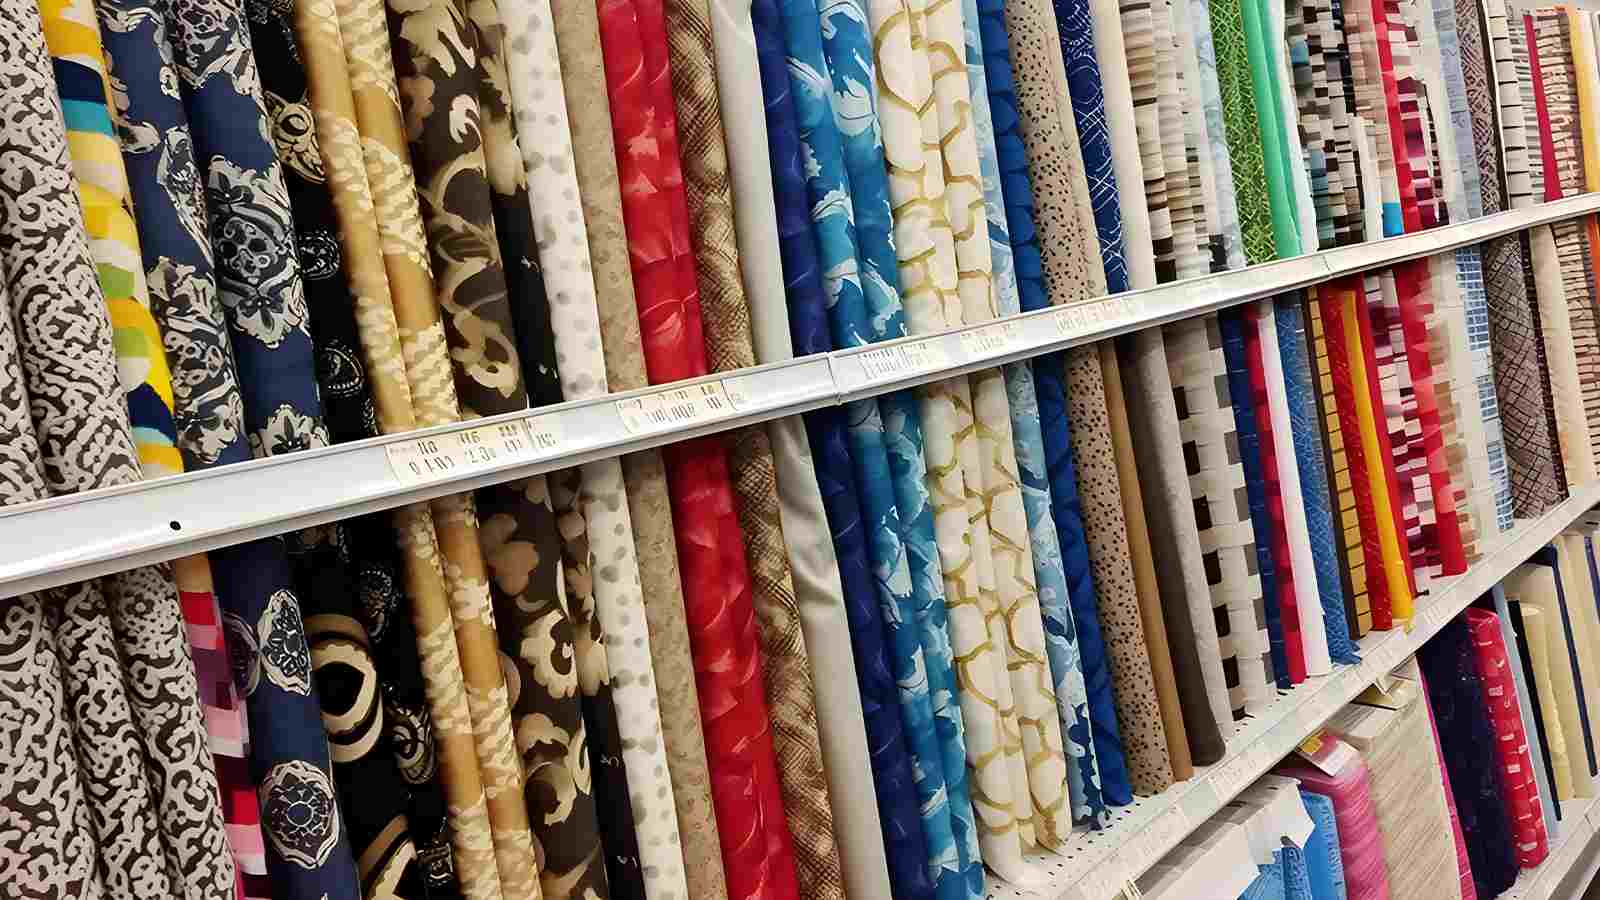 A selection of fabric on a shelf in a store.